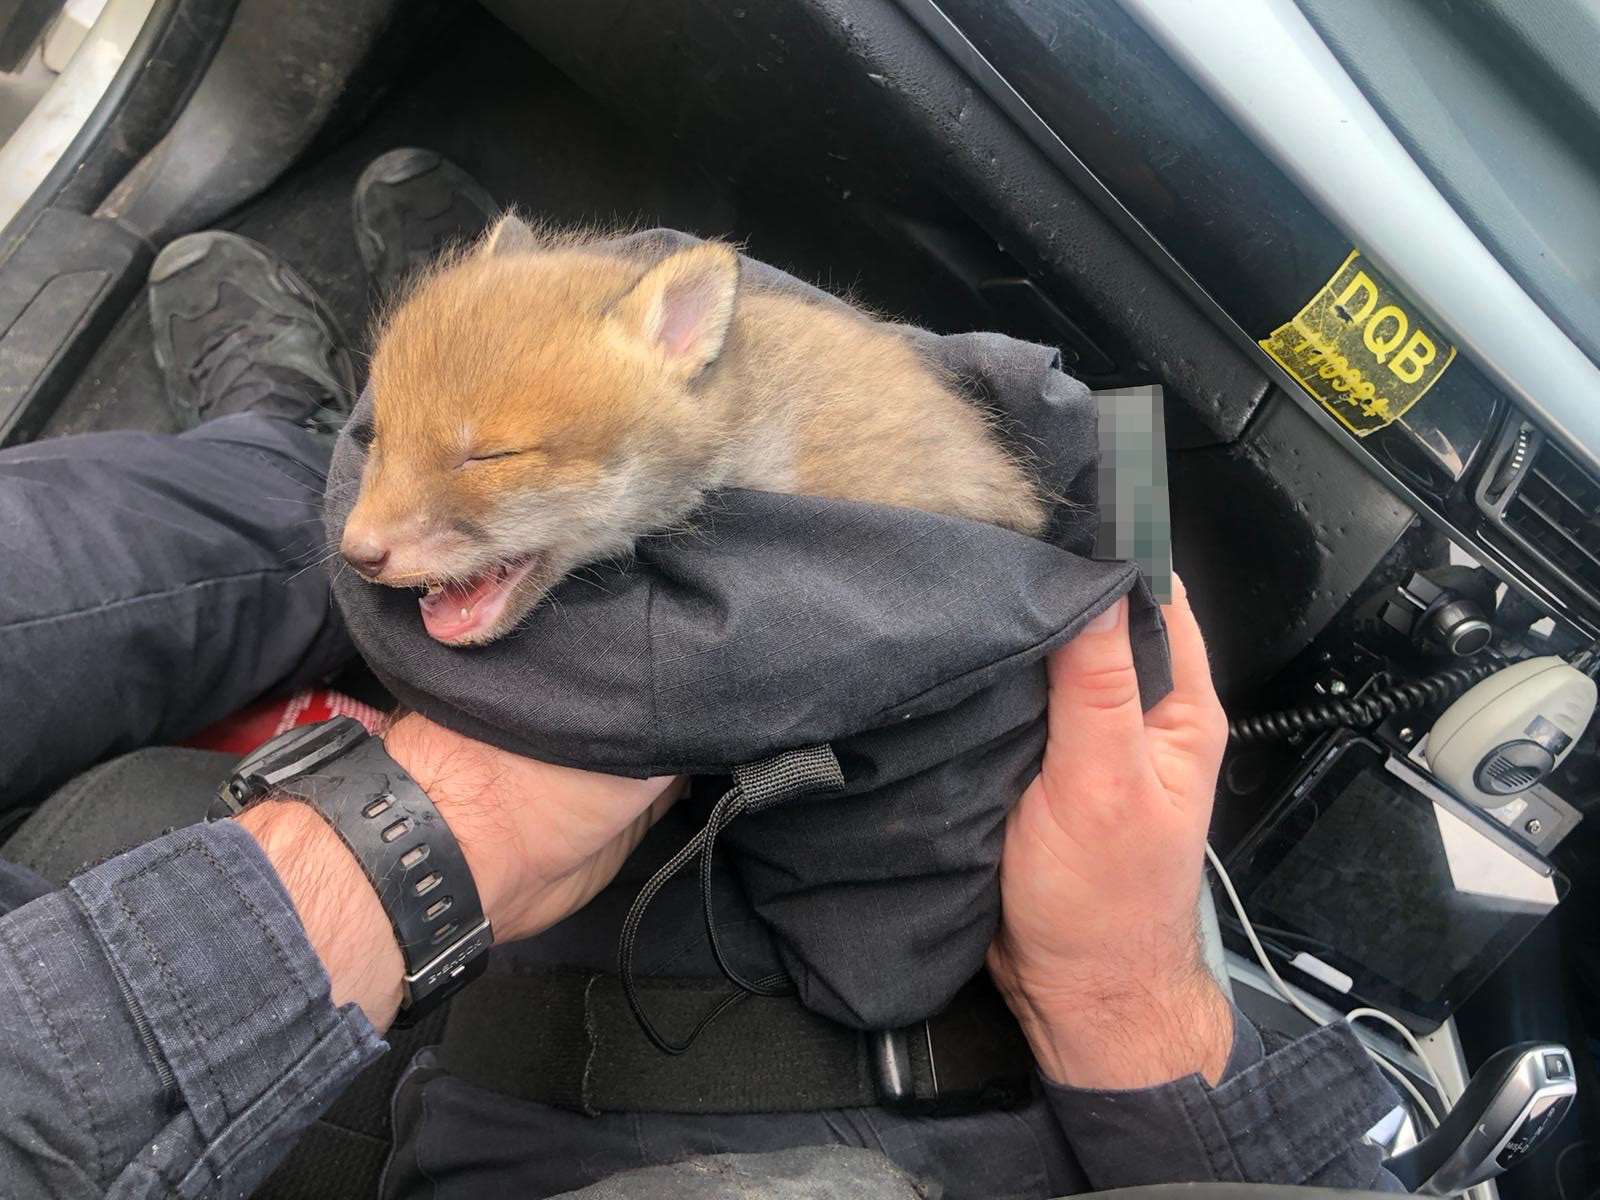 Bobby was handed over to The Fox Project, a charity devoted to rehabilitating and fostering foxes for release in the wild (Southwark Police/PA)